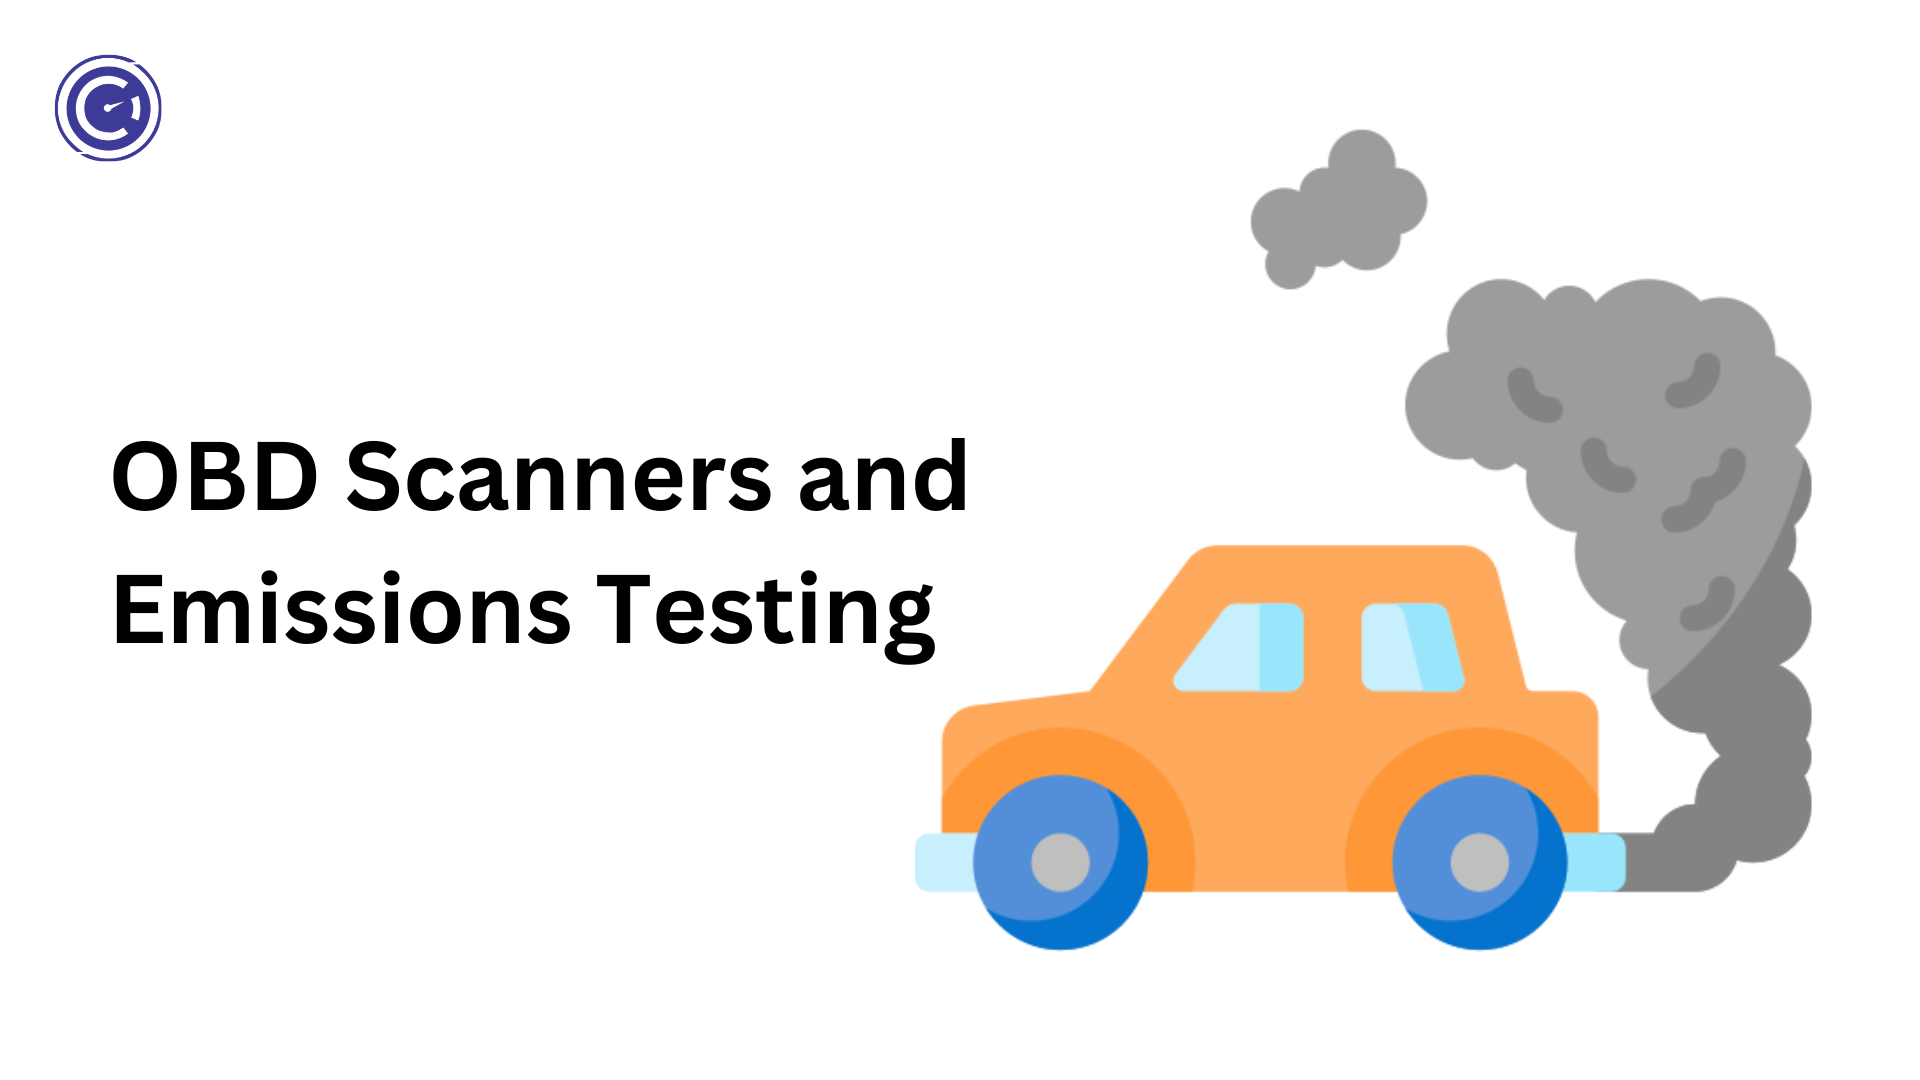 OBD Scanners and Emissions Testing